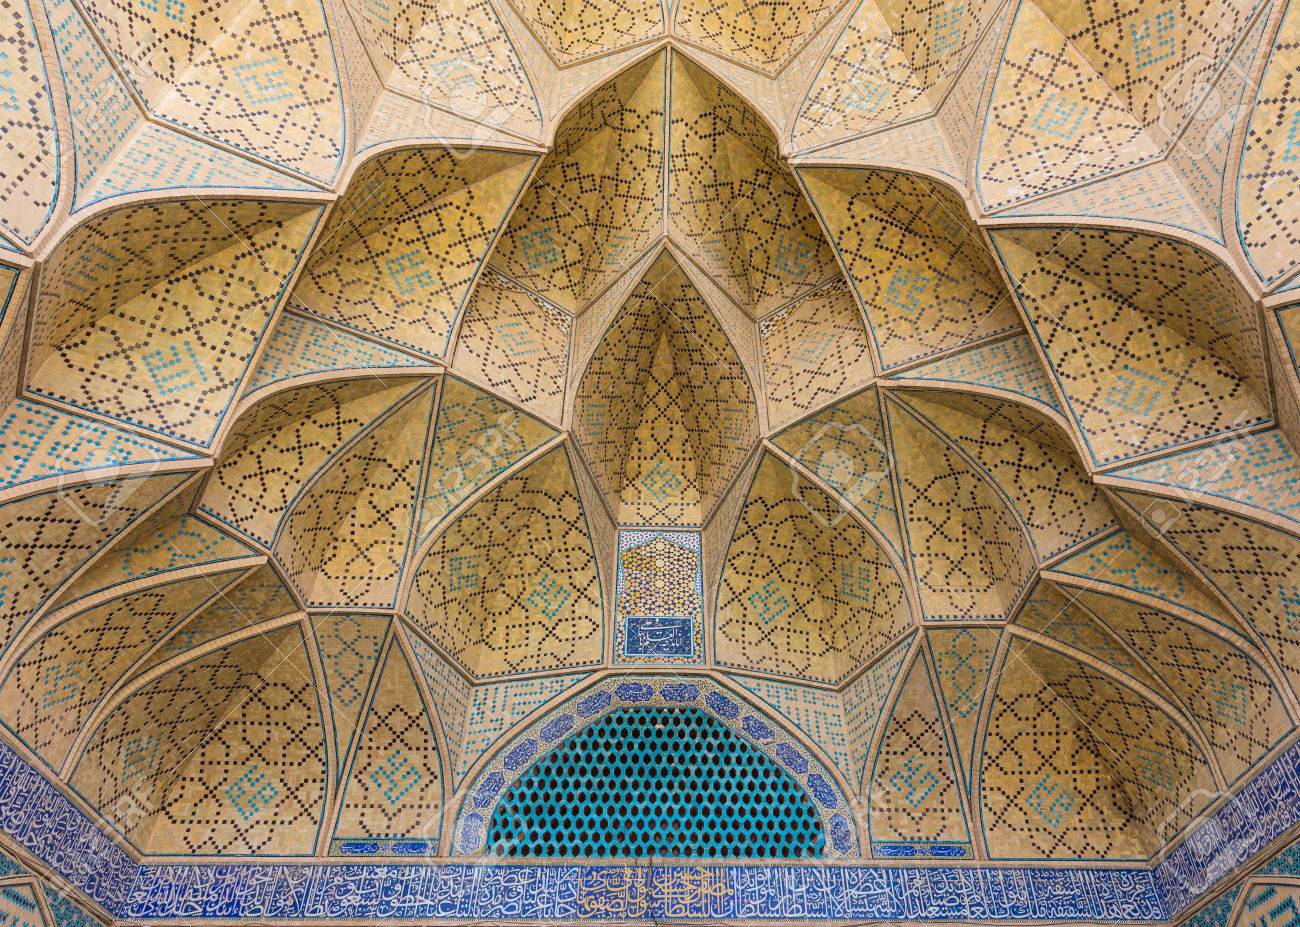 42366573-mosaic-of-the-jameh-mosque-of-isfahan-iran-this-mosque-is-unesco-world-heritage-site.jpg